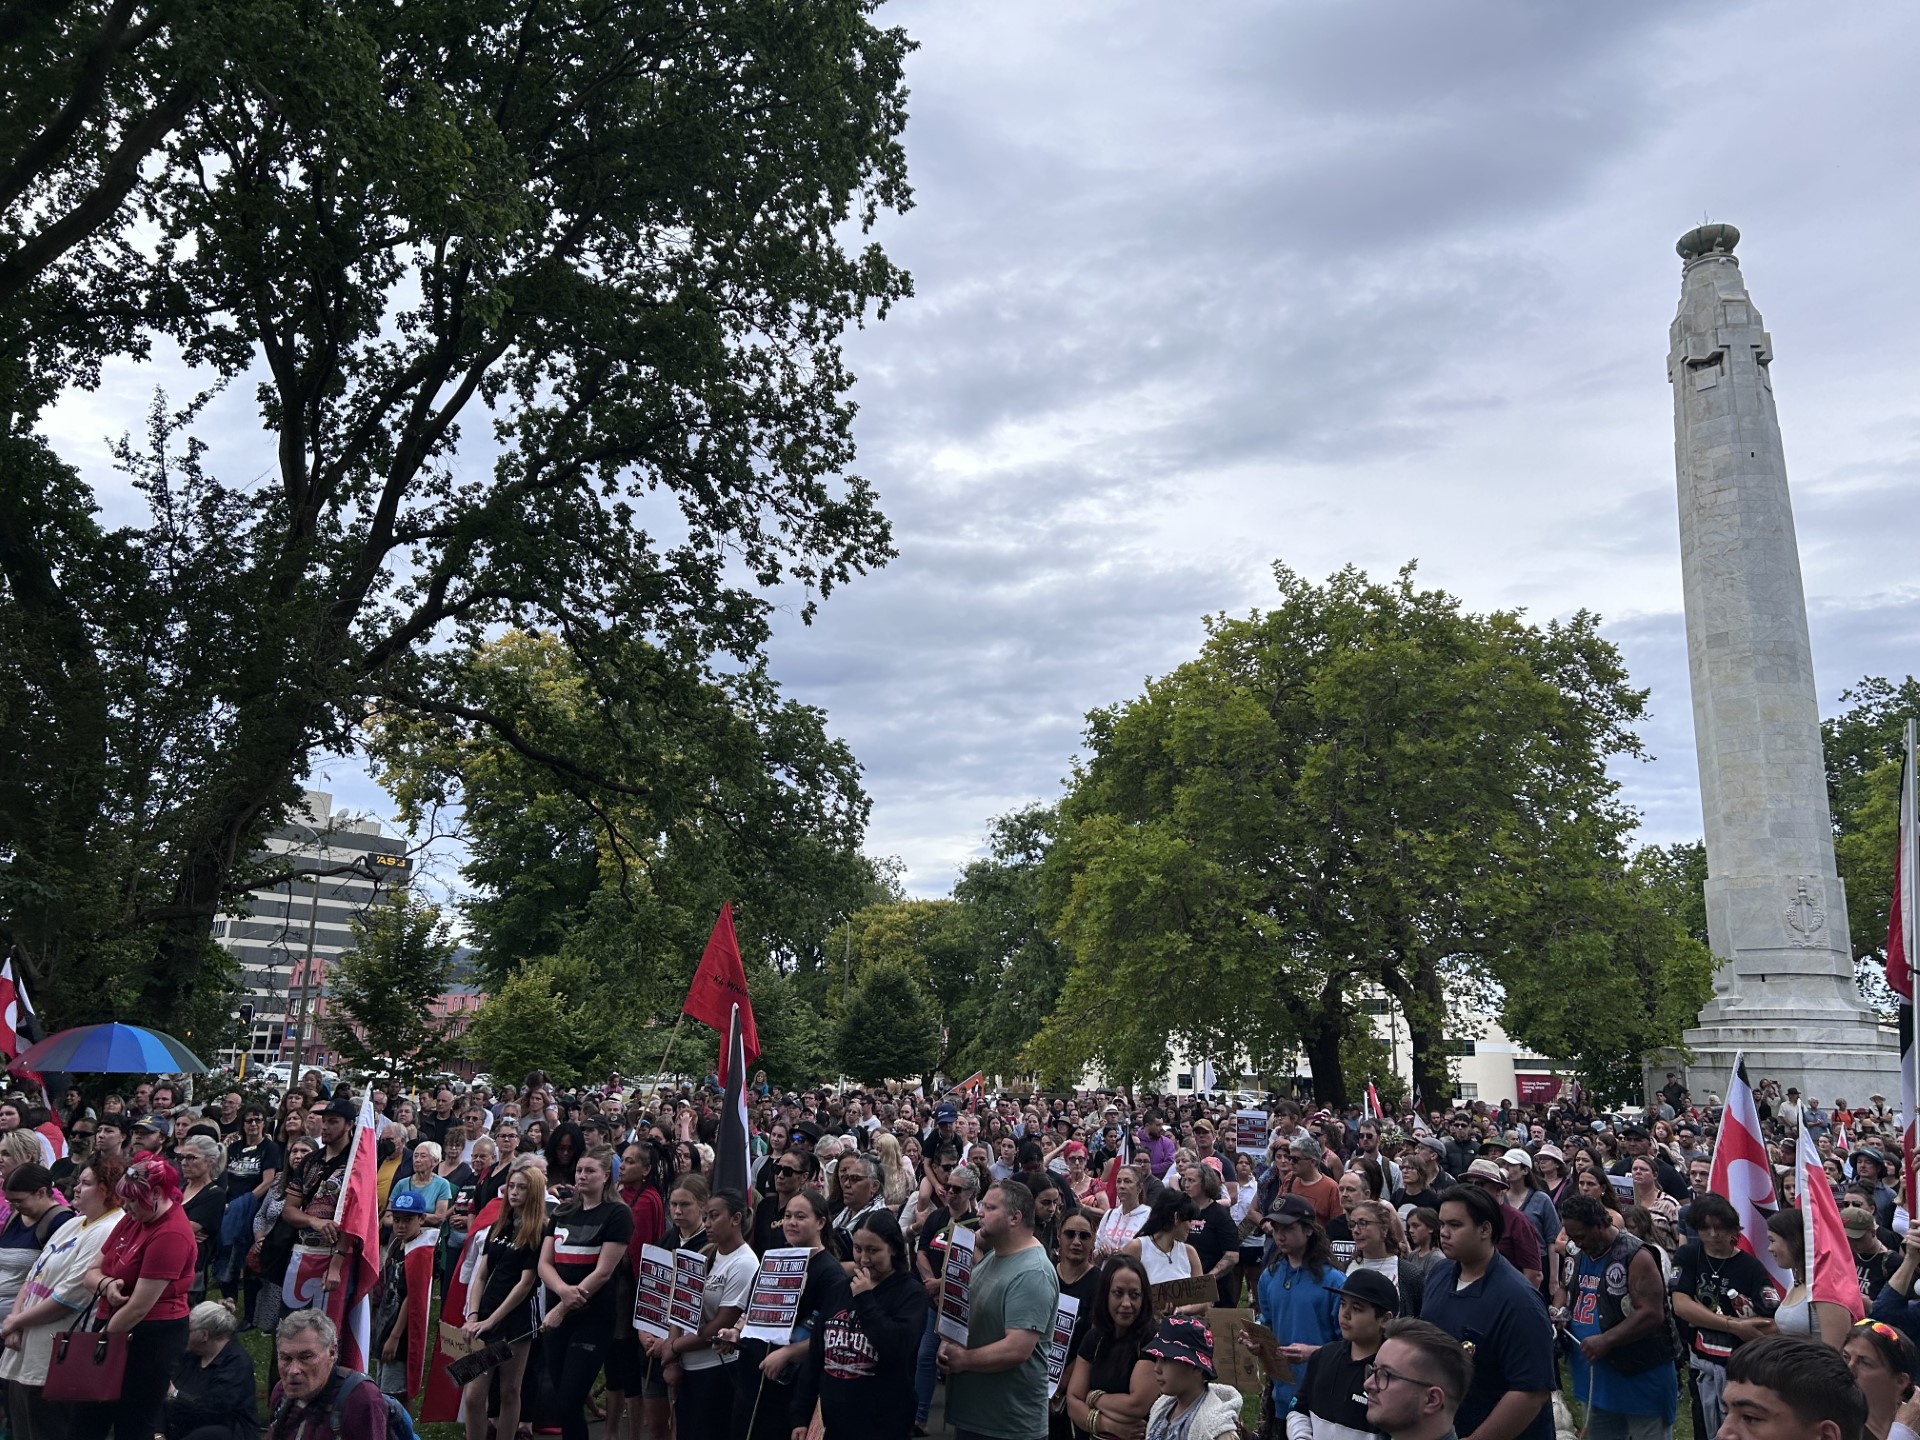 The crowd gathered at Queens Gardens this morning. PHOTO: GREGOR RICHARDSON

